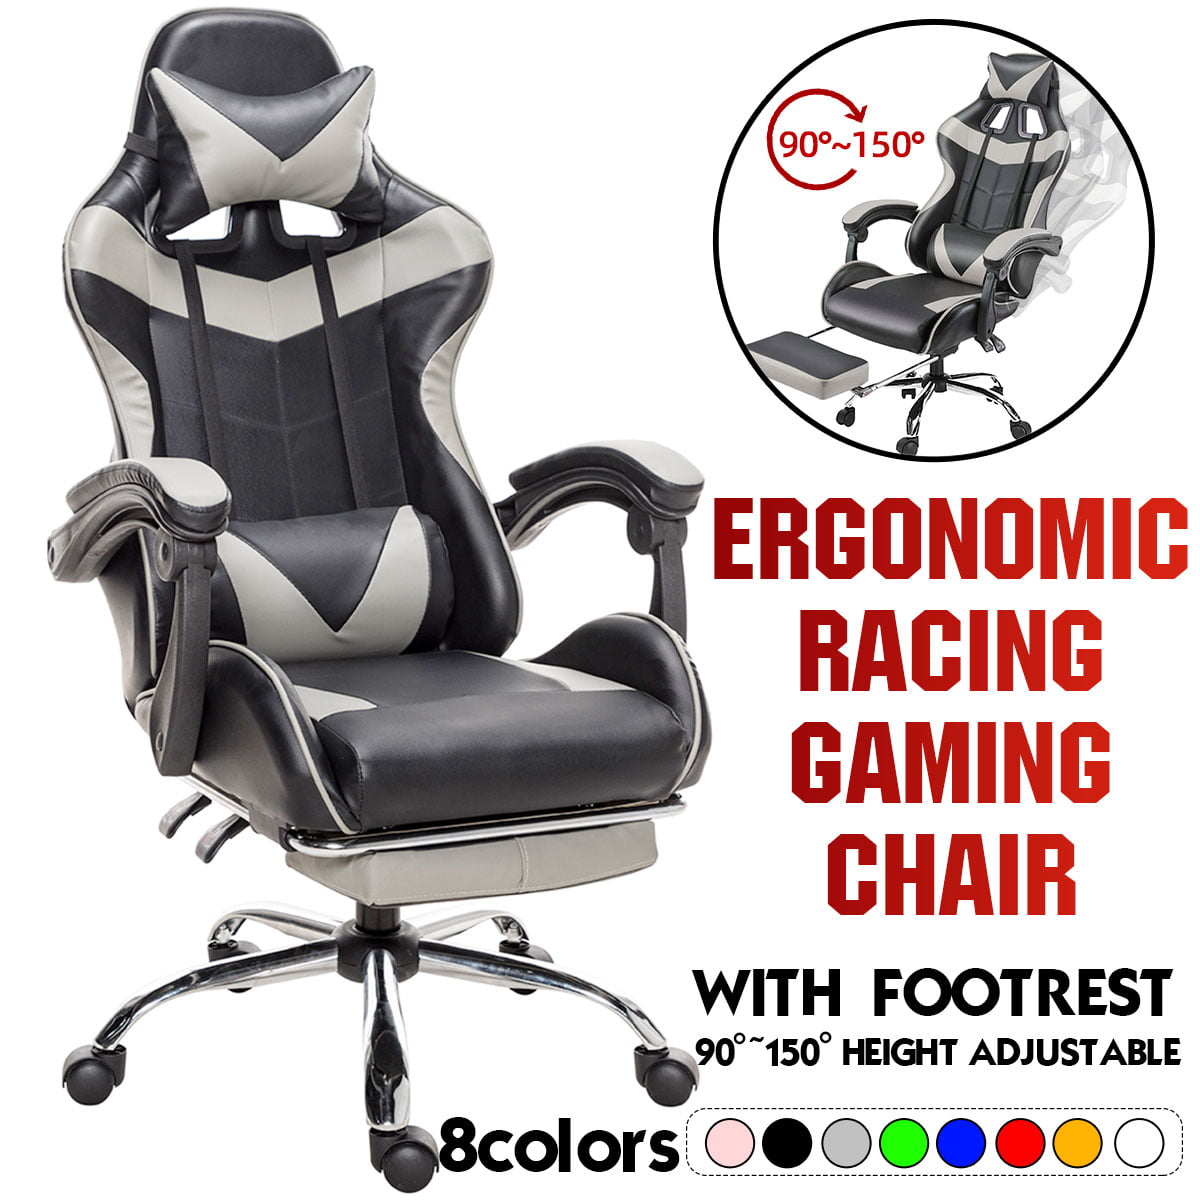 Details about   White Ergonomic Leather Racing Computer Game Chair Office Desk Swivel MidBack US 